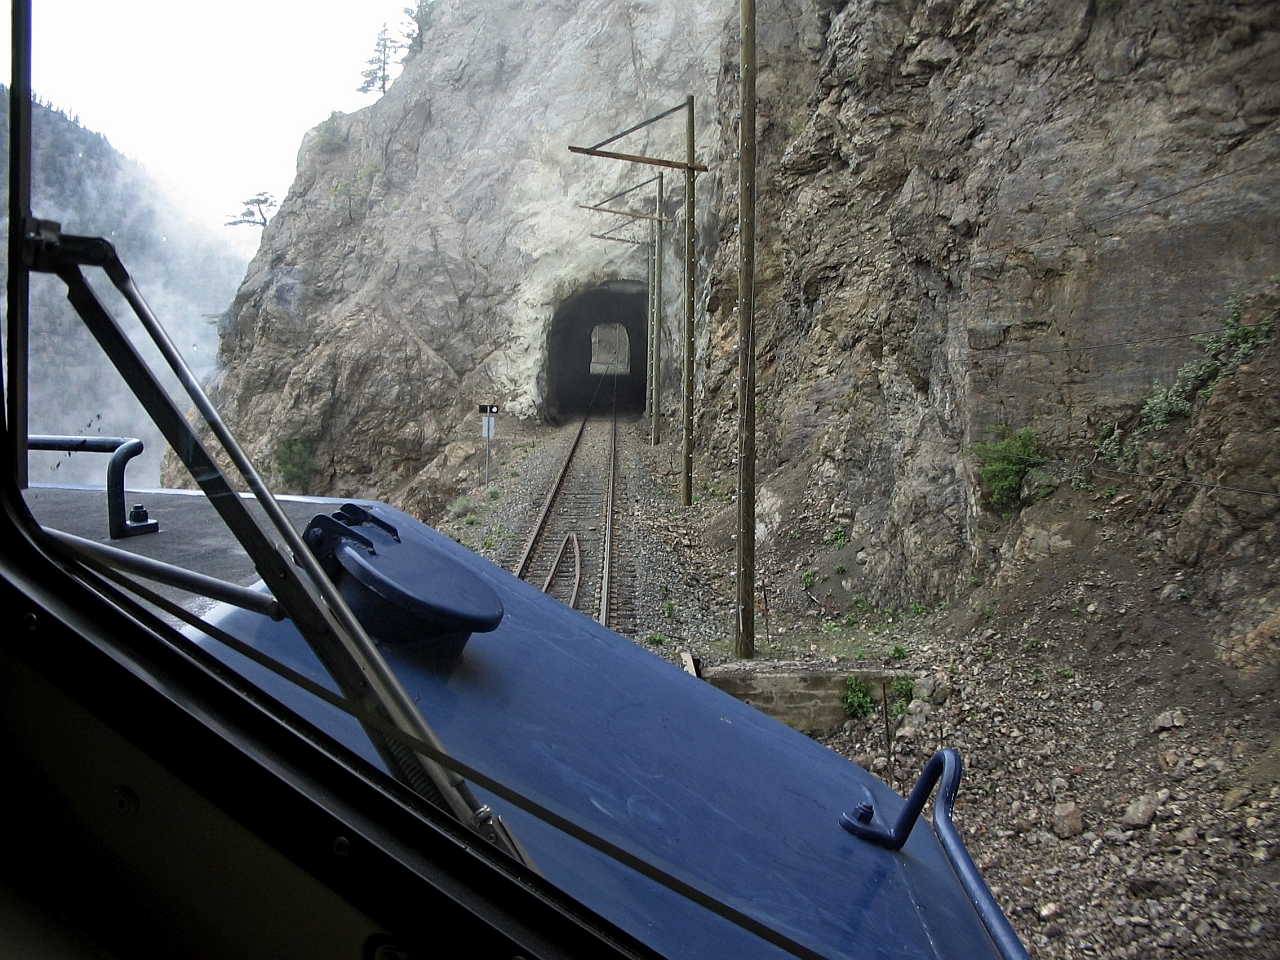 a misty morning on the mountain as we are between tunnels at mile 186.5 on the BC Lillooet sub on the Kelly Lake Hill.  sorry, I cannot find the location on the satellite imagery, pretty much a very remote location for photographers as well.